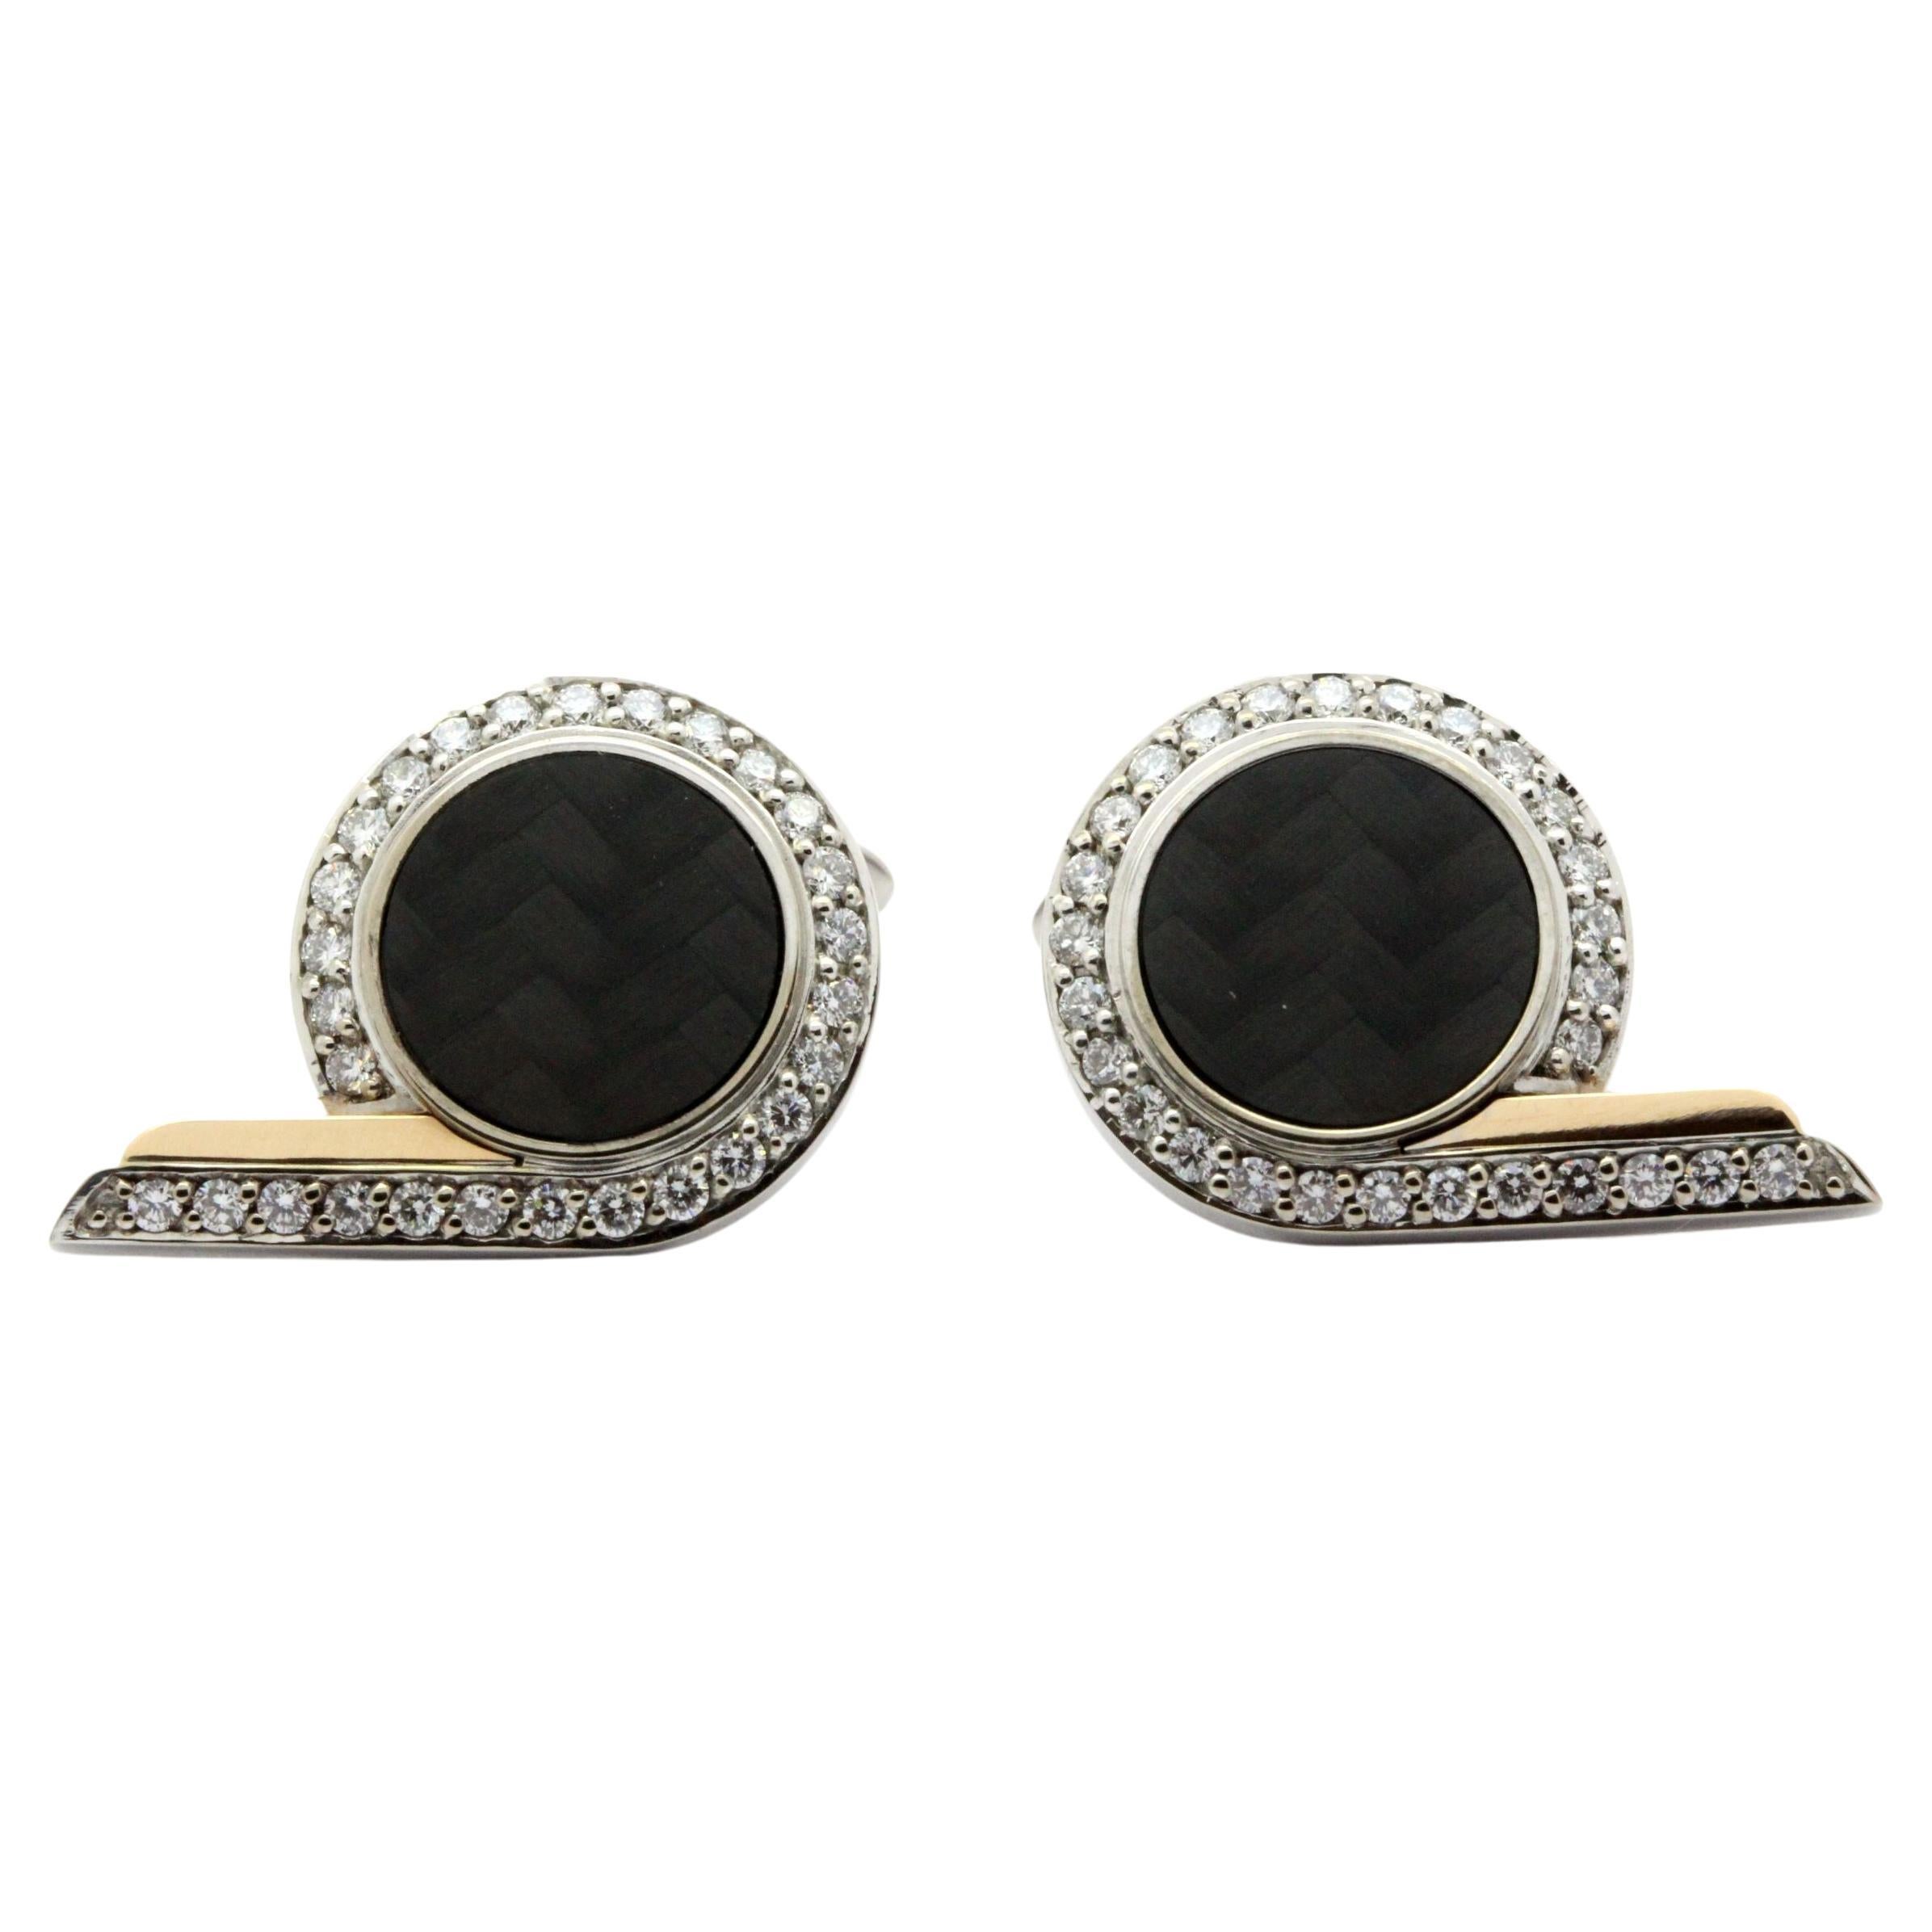 18ct White and Rose Gold Cufflinks with Black Carbon Fibre and Diamonds